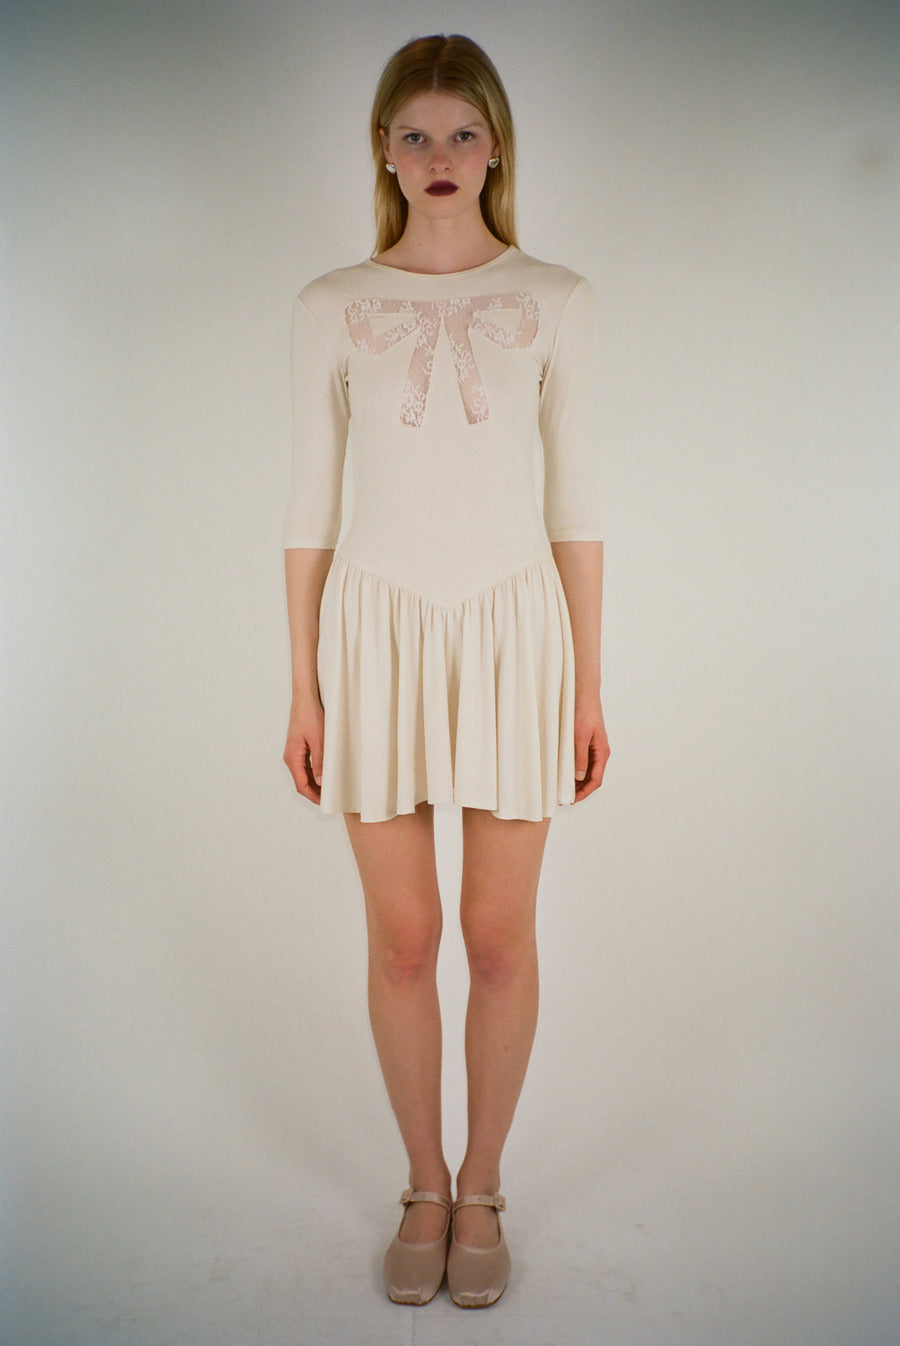 Mini dress in off white with lace cut out bow detail on model